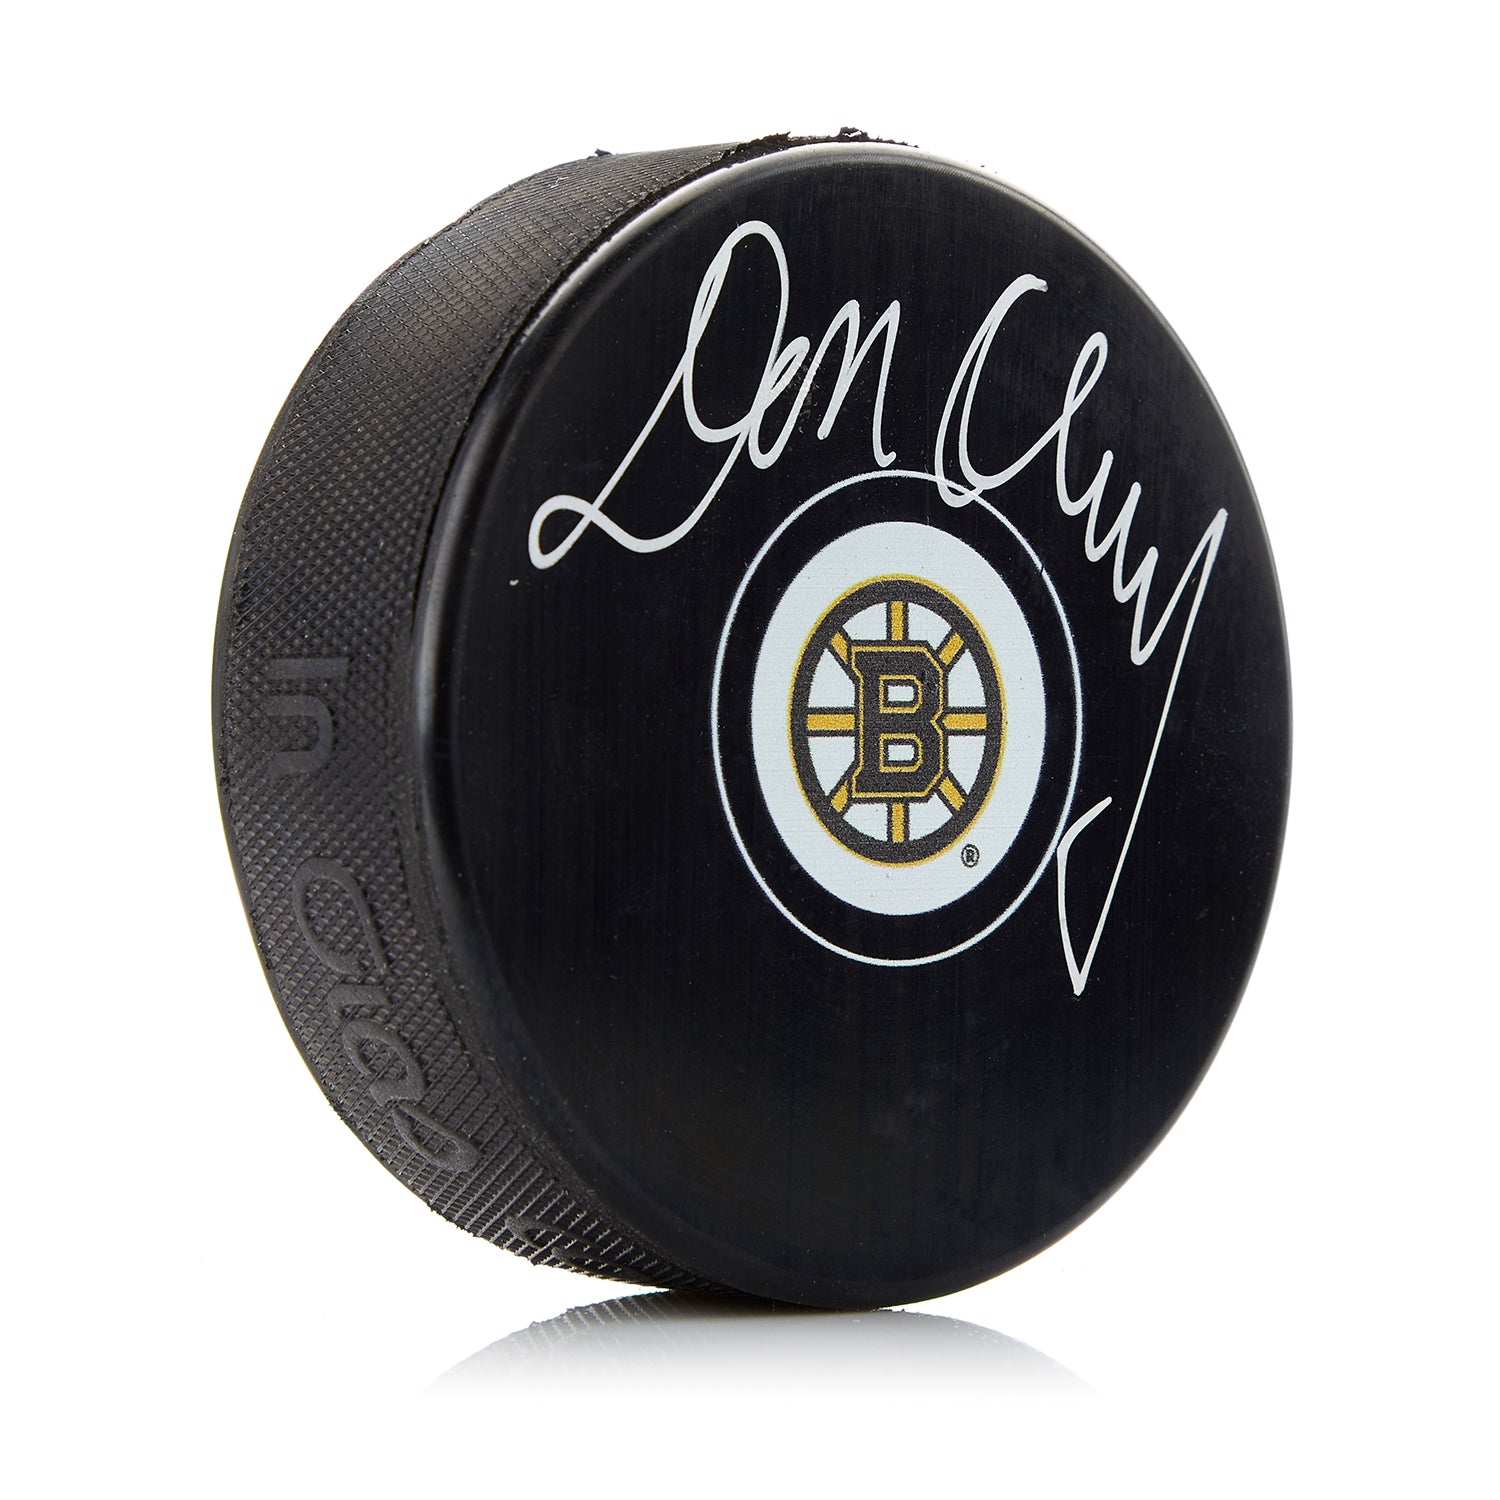 Don Cherry Boston Bruins Autographed Hockey Puck